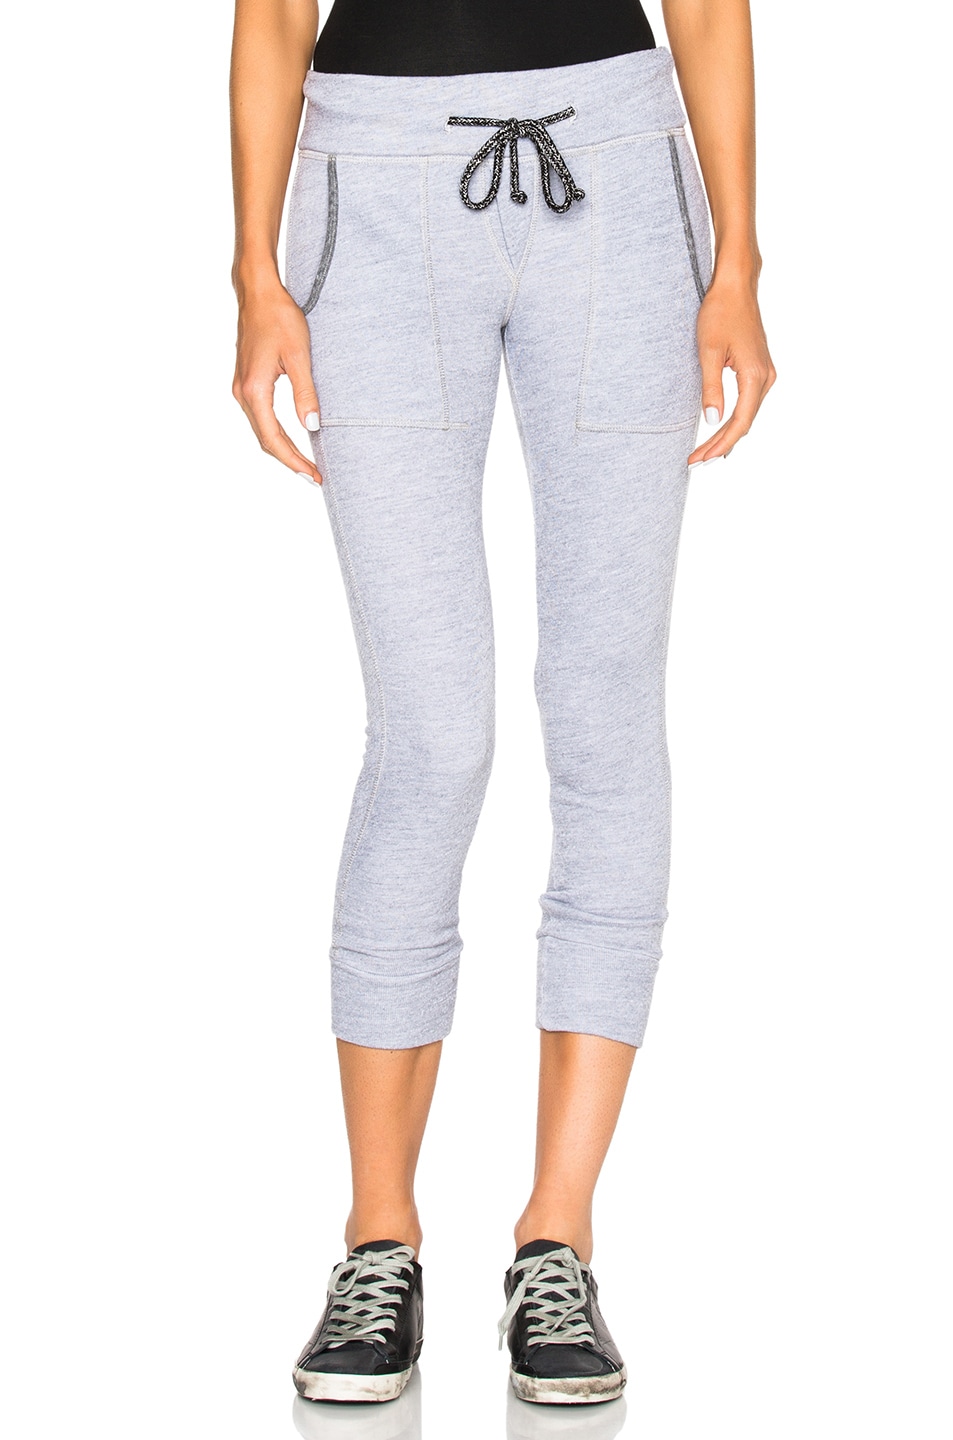 Image 1 of NSF All Day NSF Rue Sweatpants in Heather